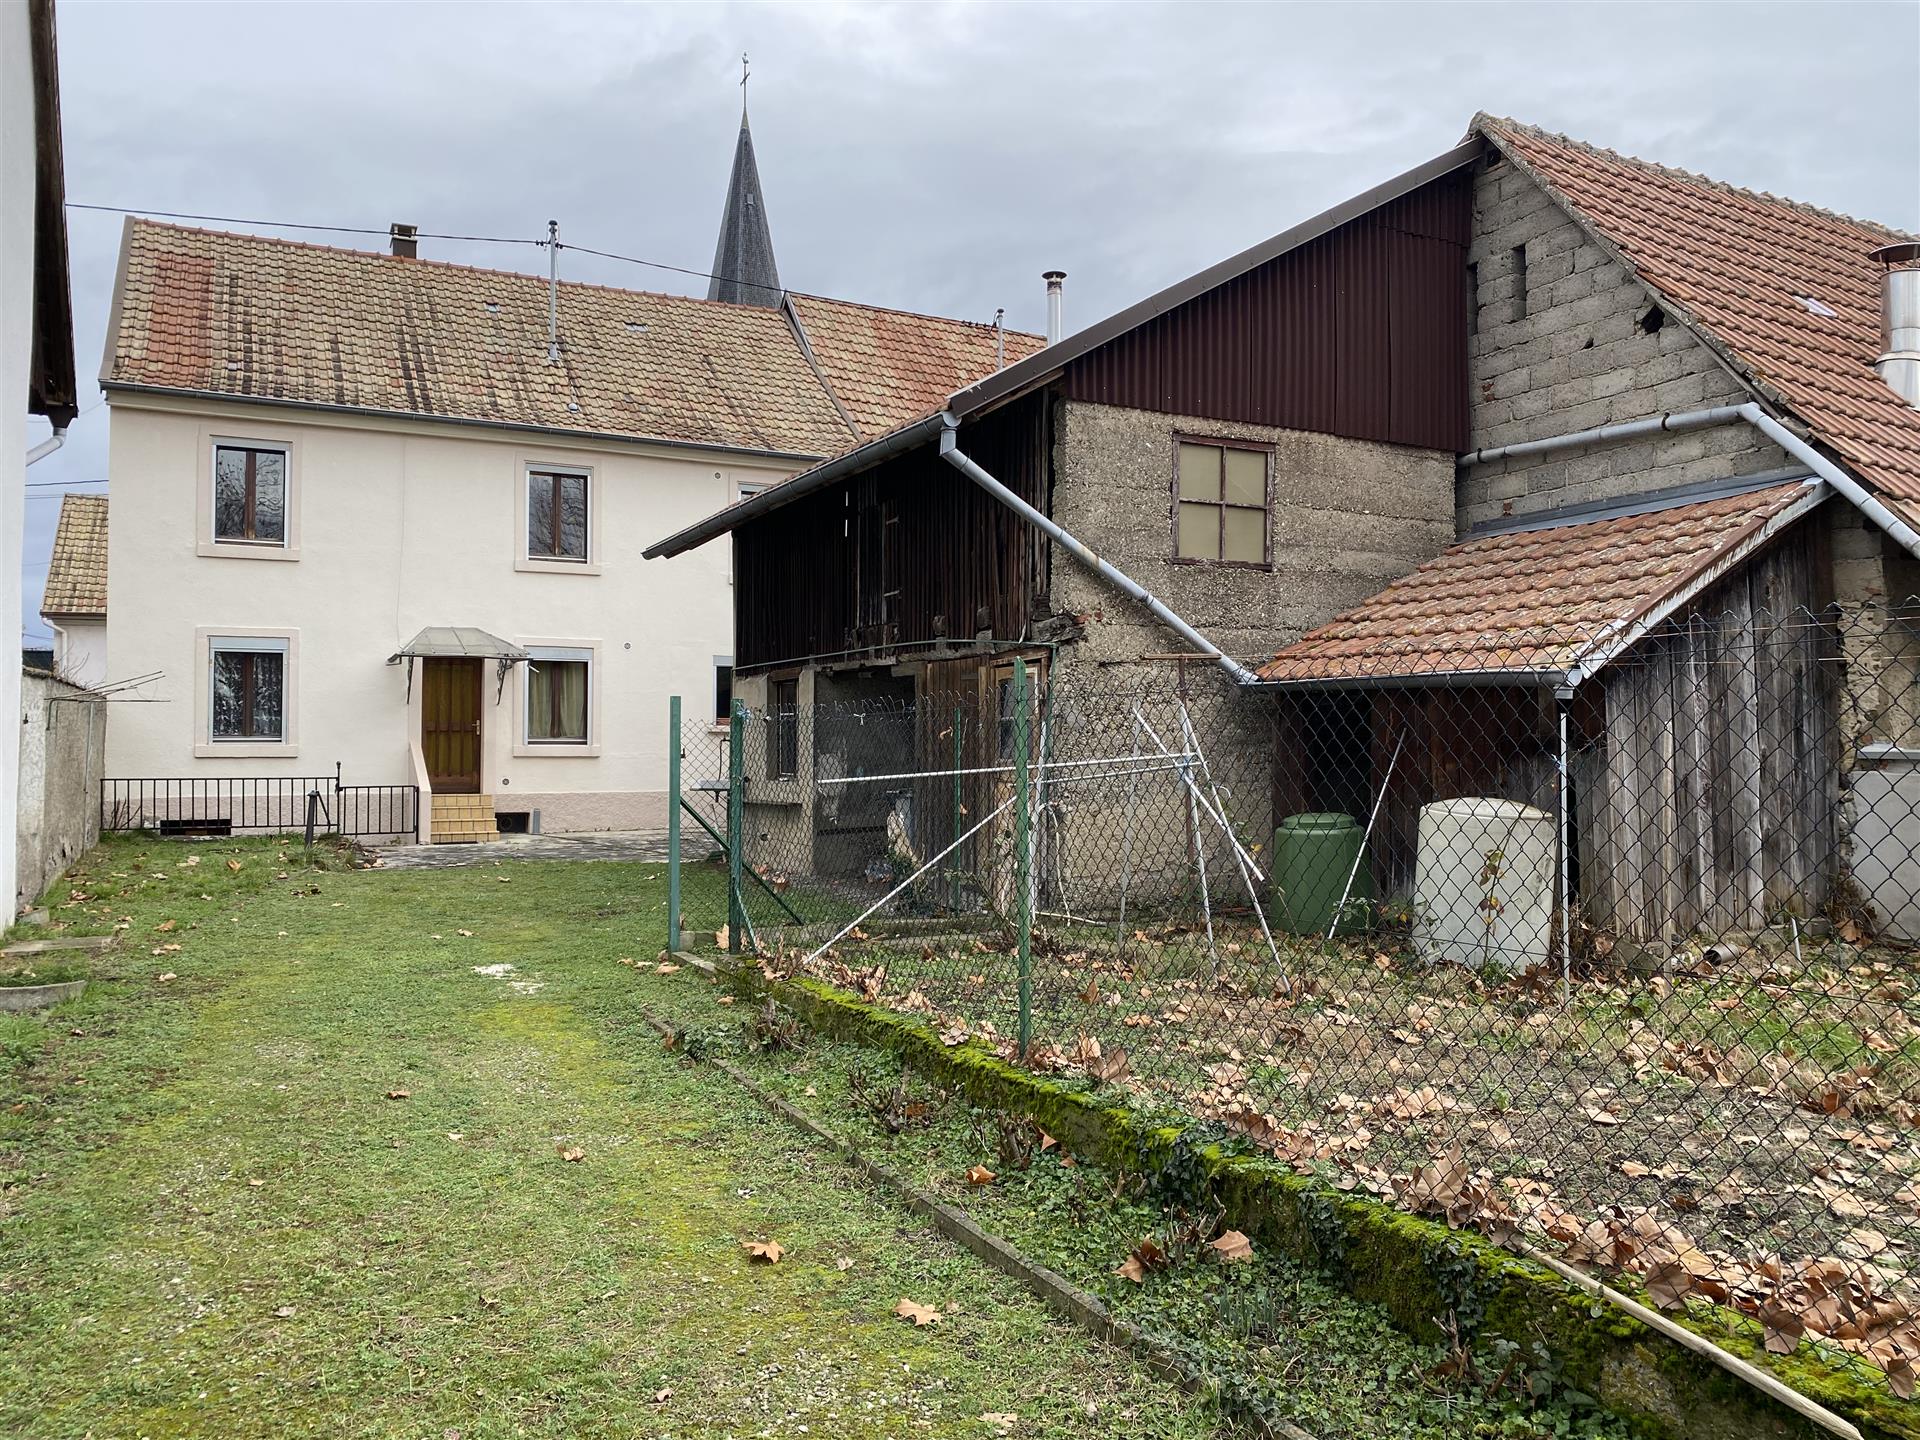 House 156m2 consisting of two dwellings in Biesheim